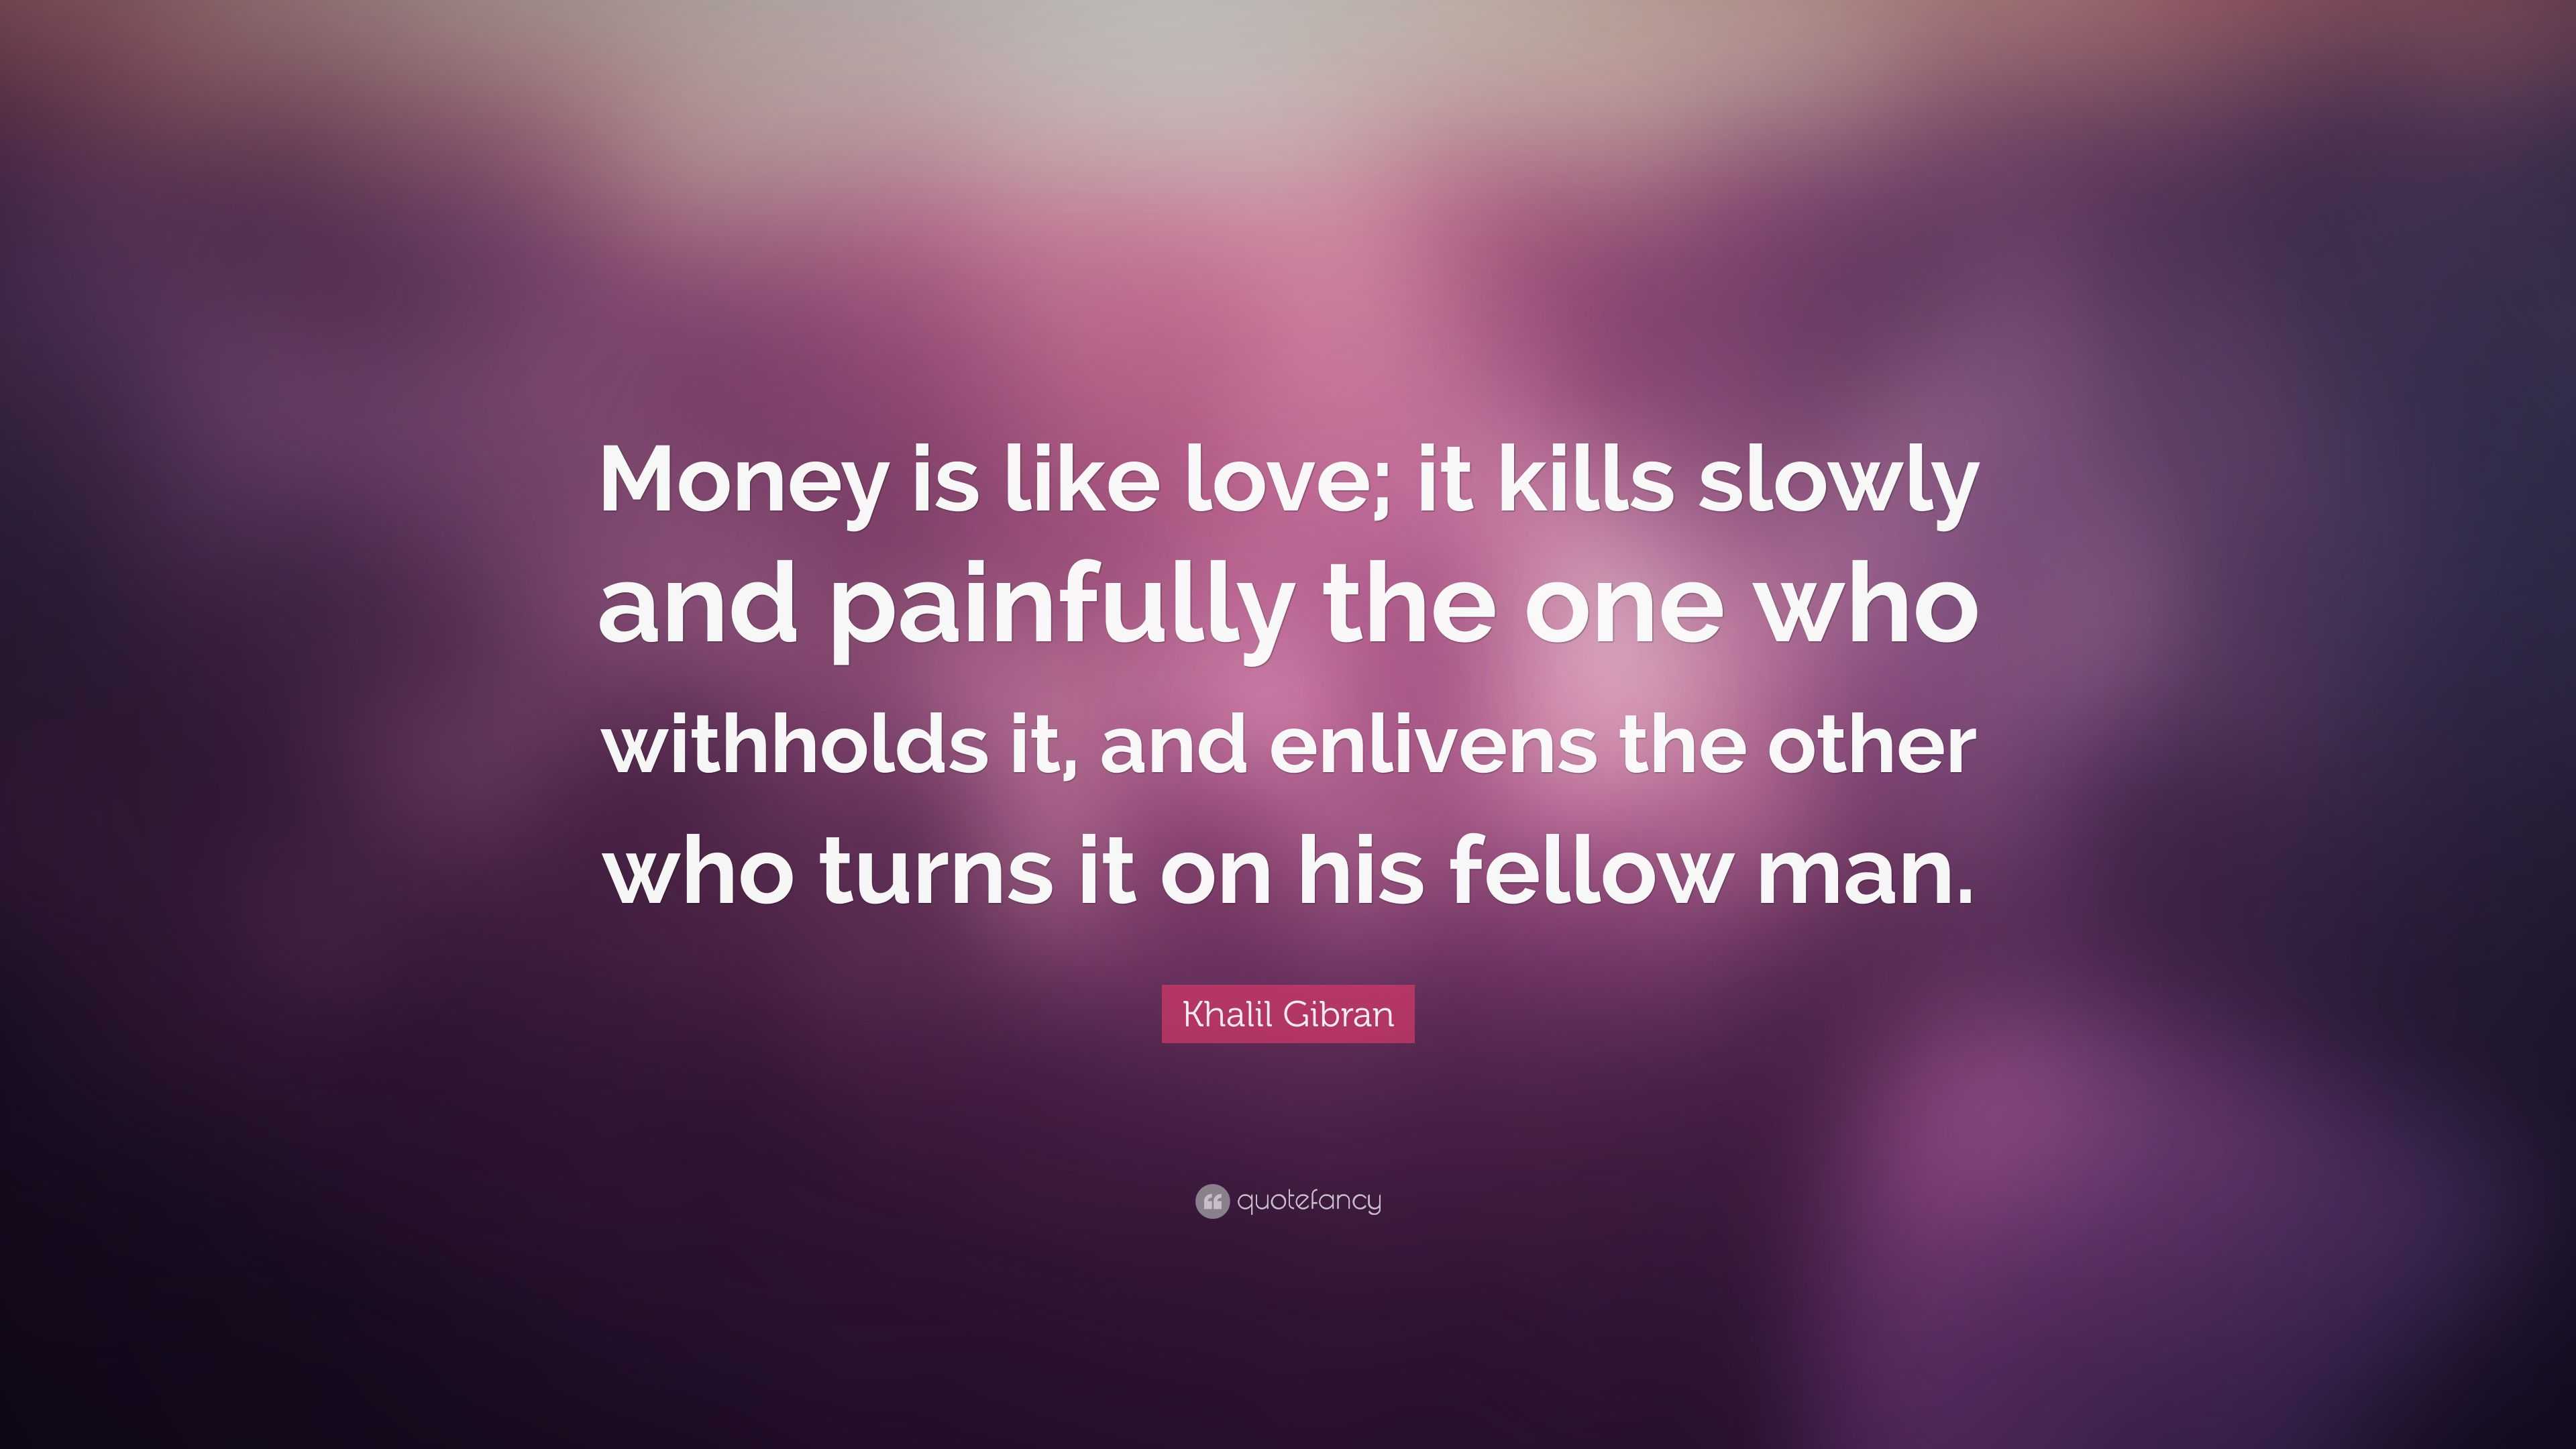 Khalil Gibran Quote: “Money is like love; it kills slowly and painfully ...